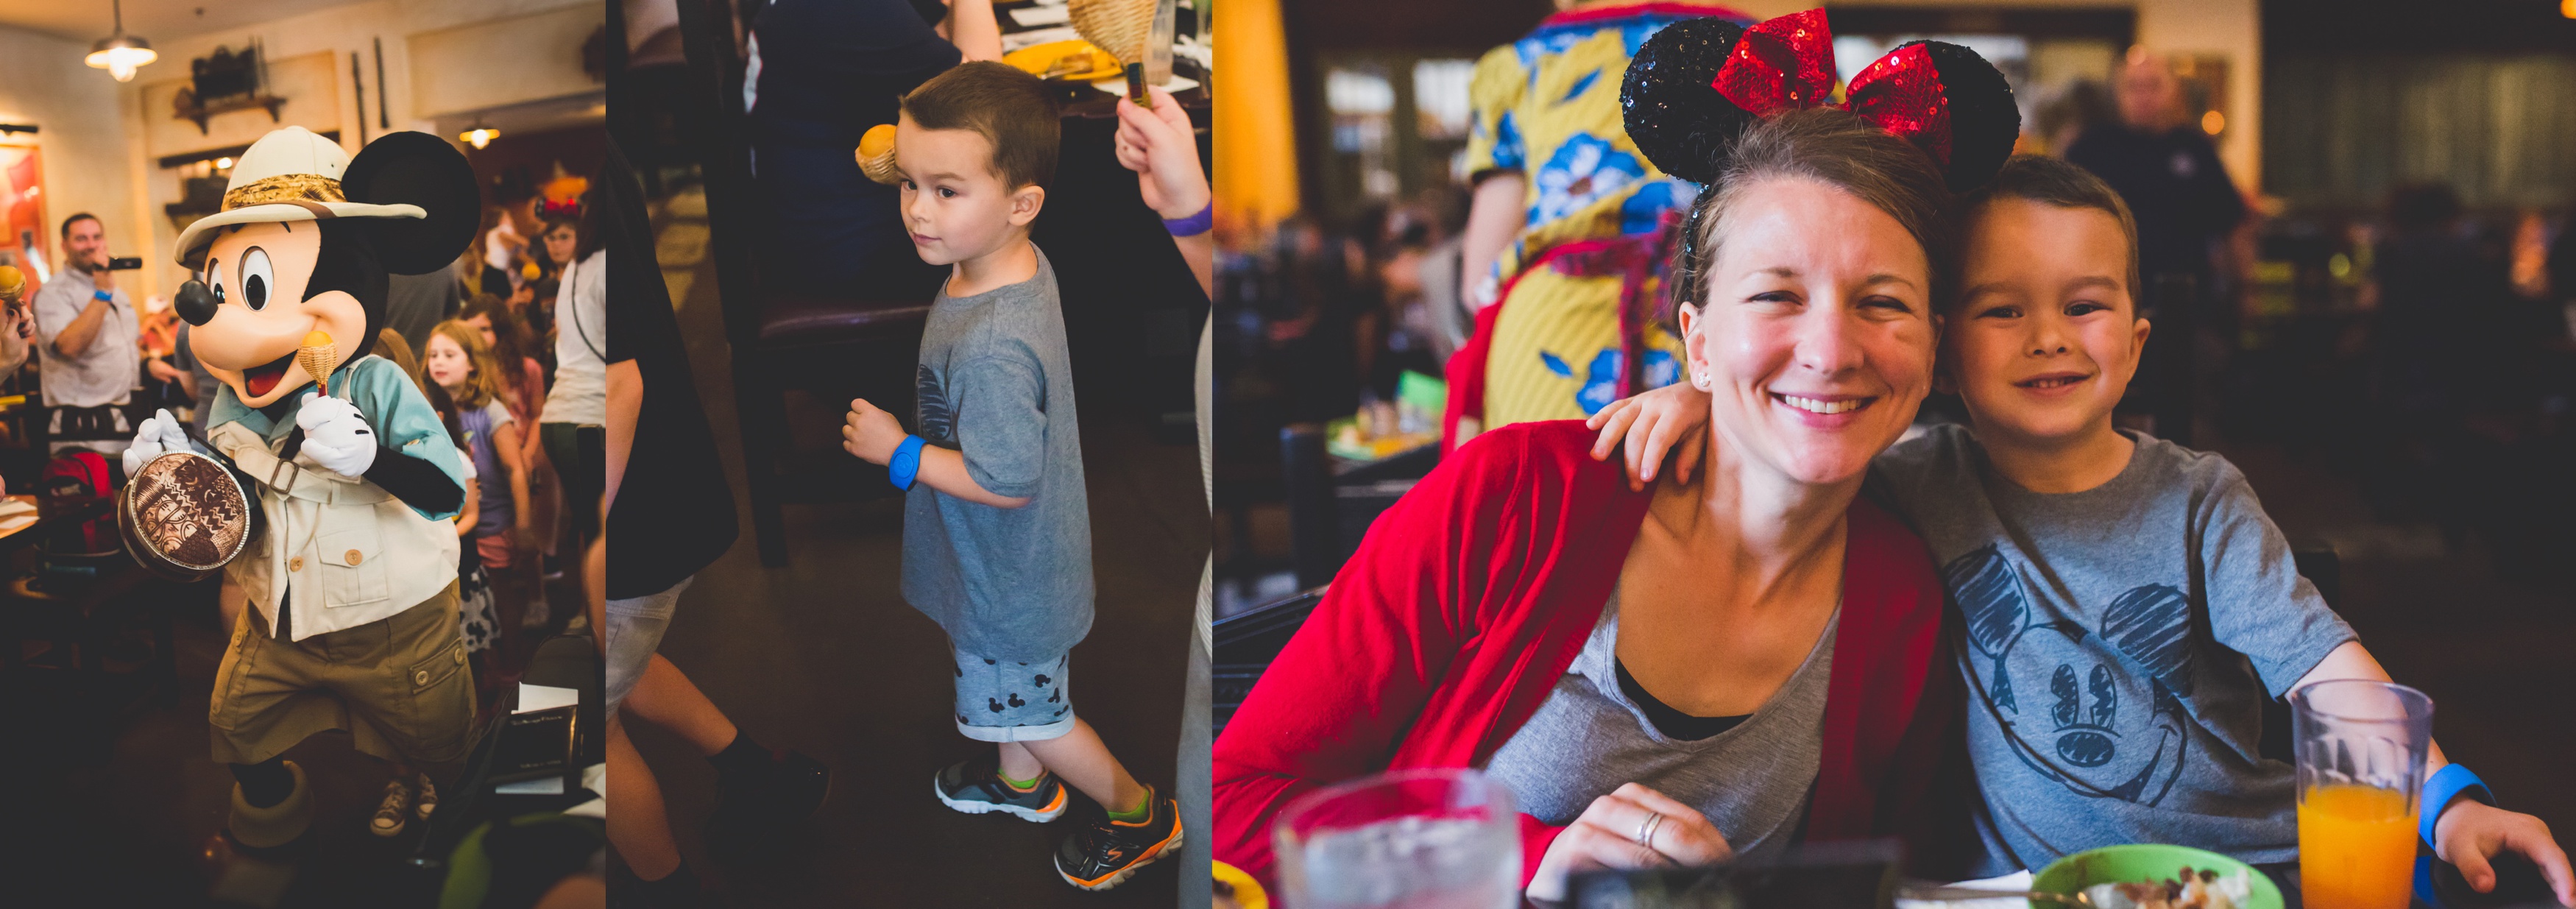 Tusker House, Animal Kingdom, Walt Disney World, Character Meals, Character Meet-and-Greet, Magic for Miles